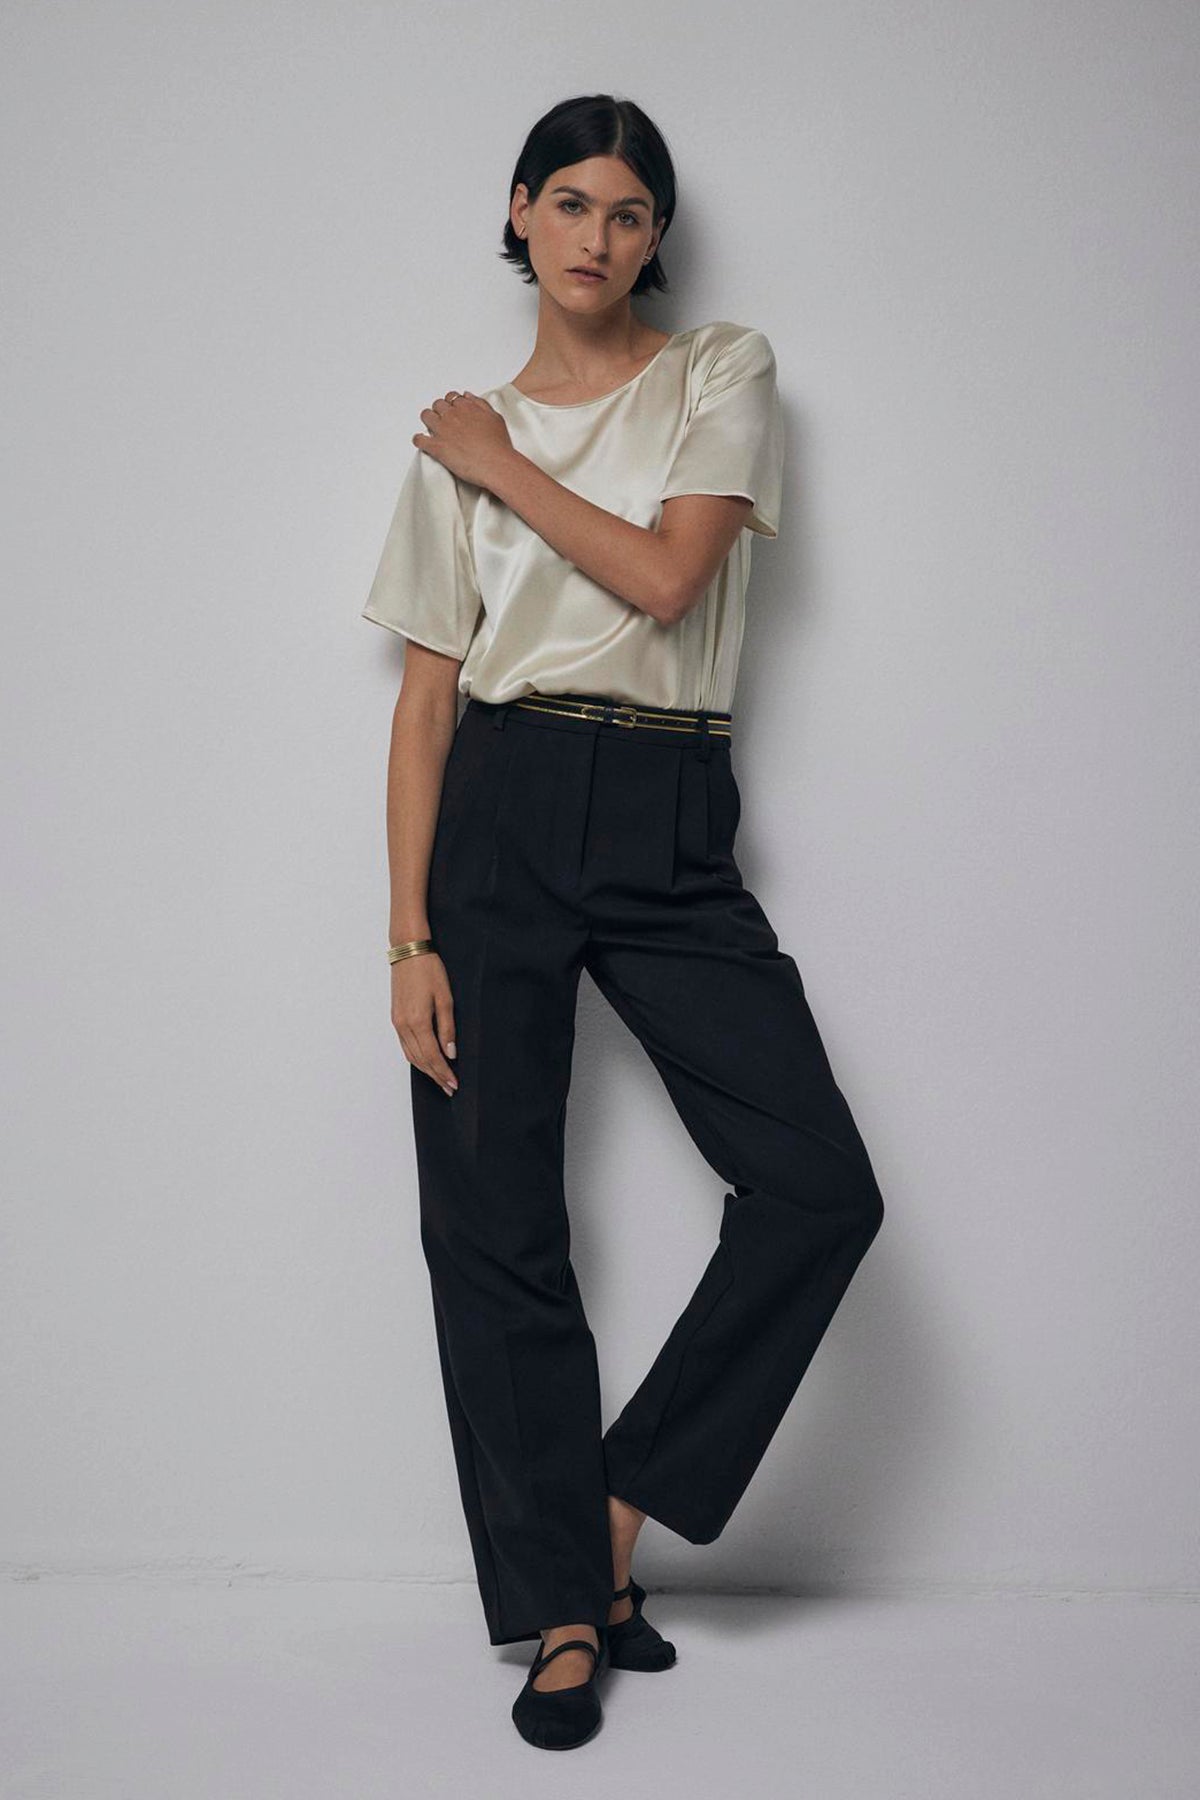 A person standing against a plain background, wearing black trousers, a PASADENA TOP in cream silk charmeuse by Velvet by Jenny Graham, and black flats.-36463793930433